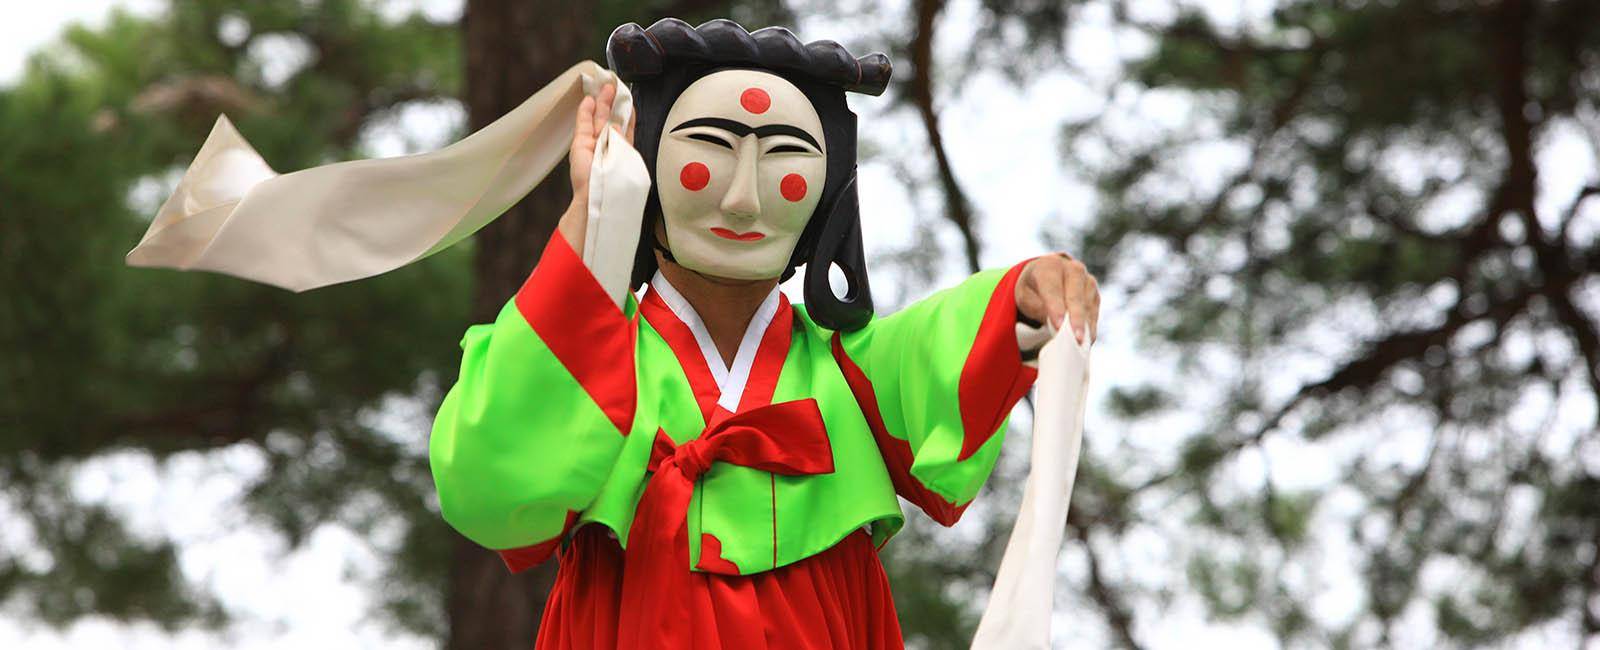 Andong International Mask Dance Festival | 6 reasons to visit Korea in autumn